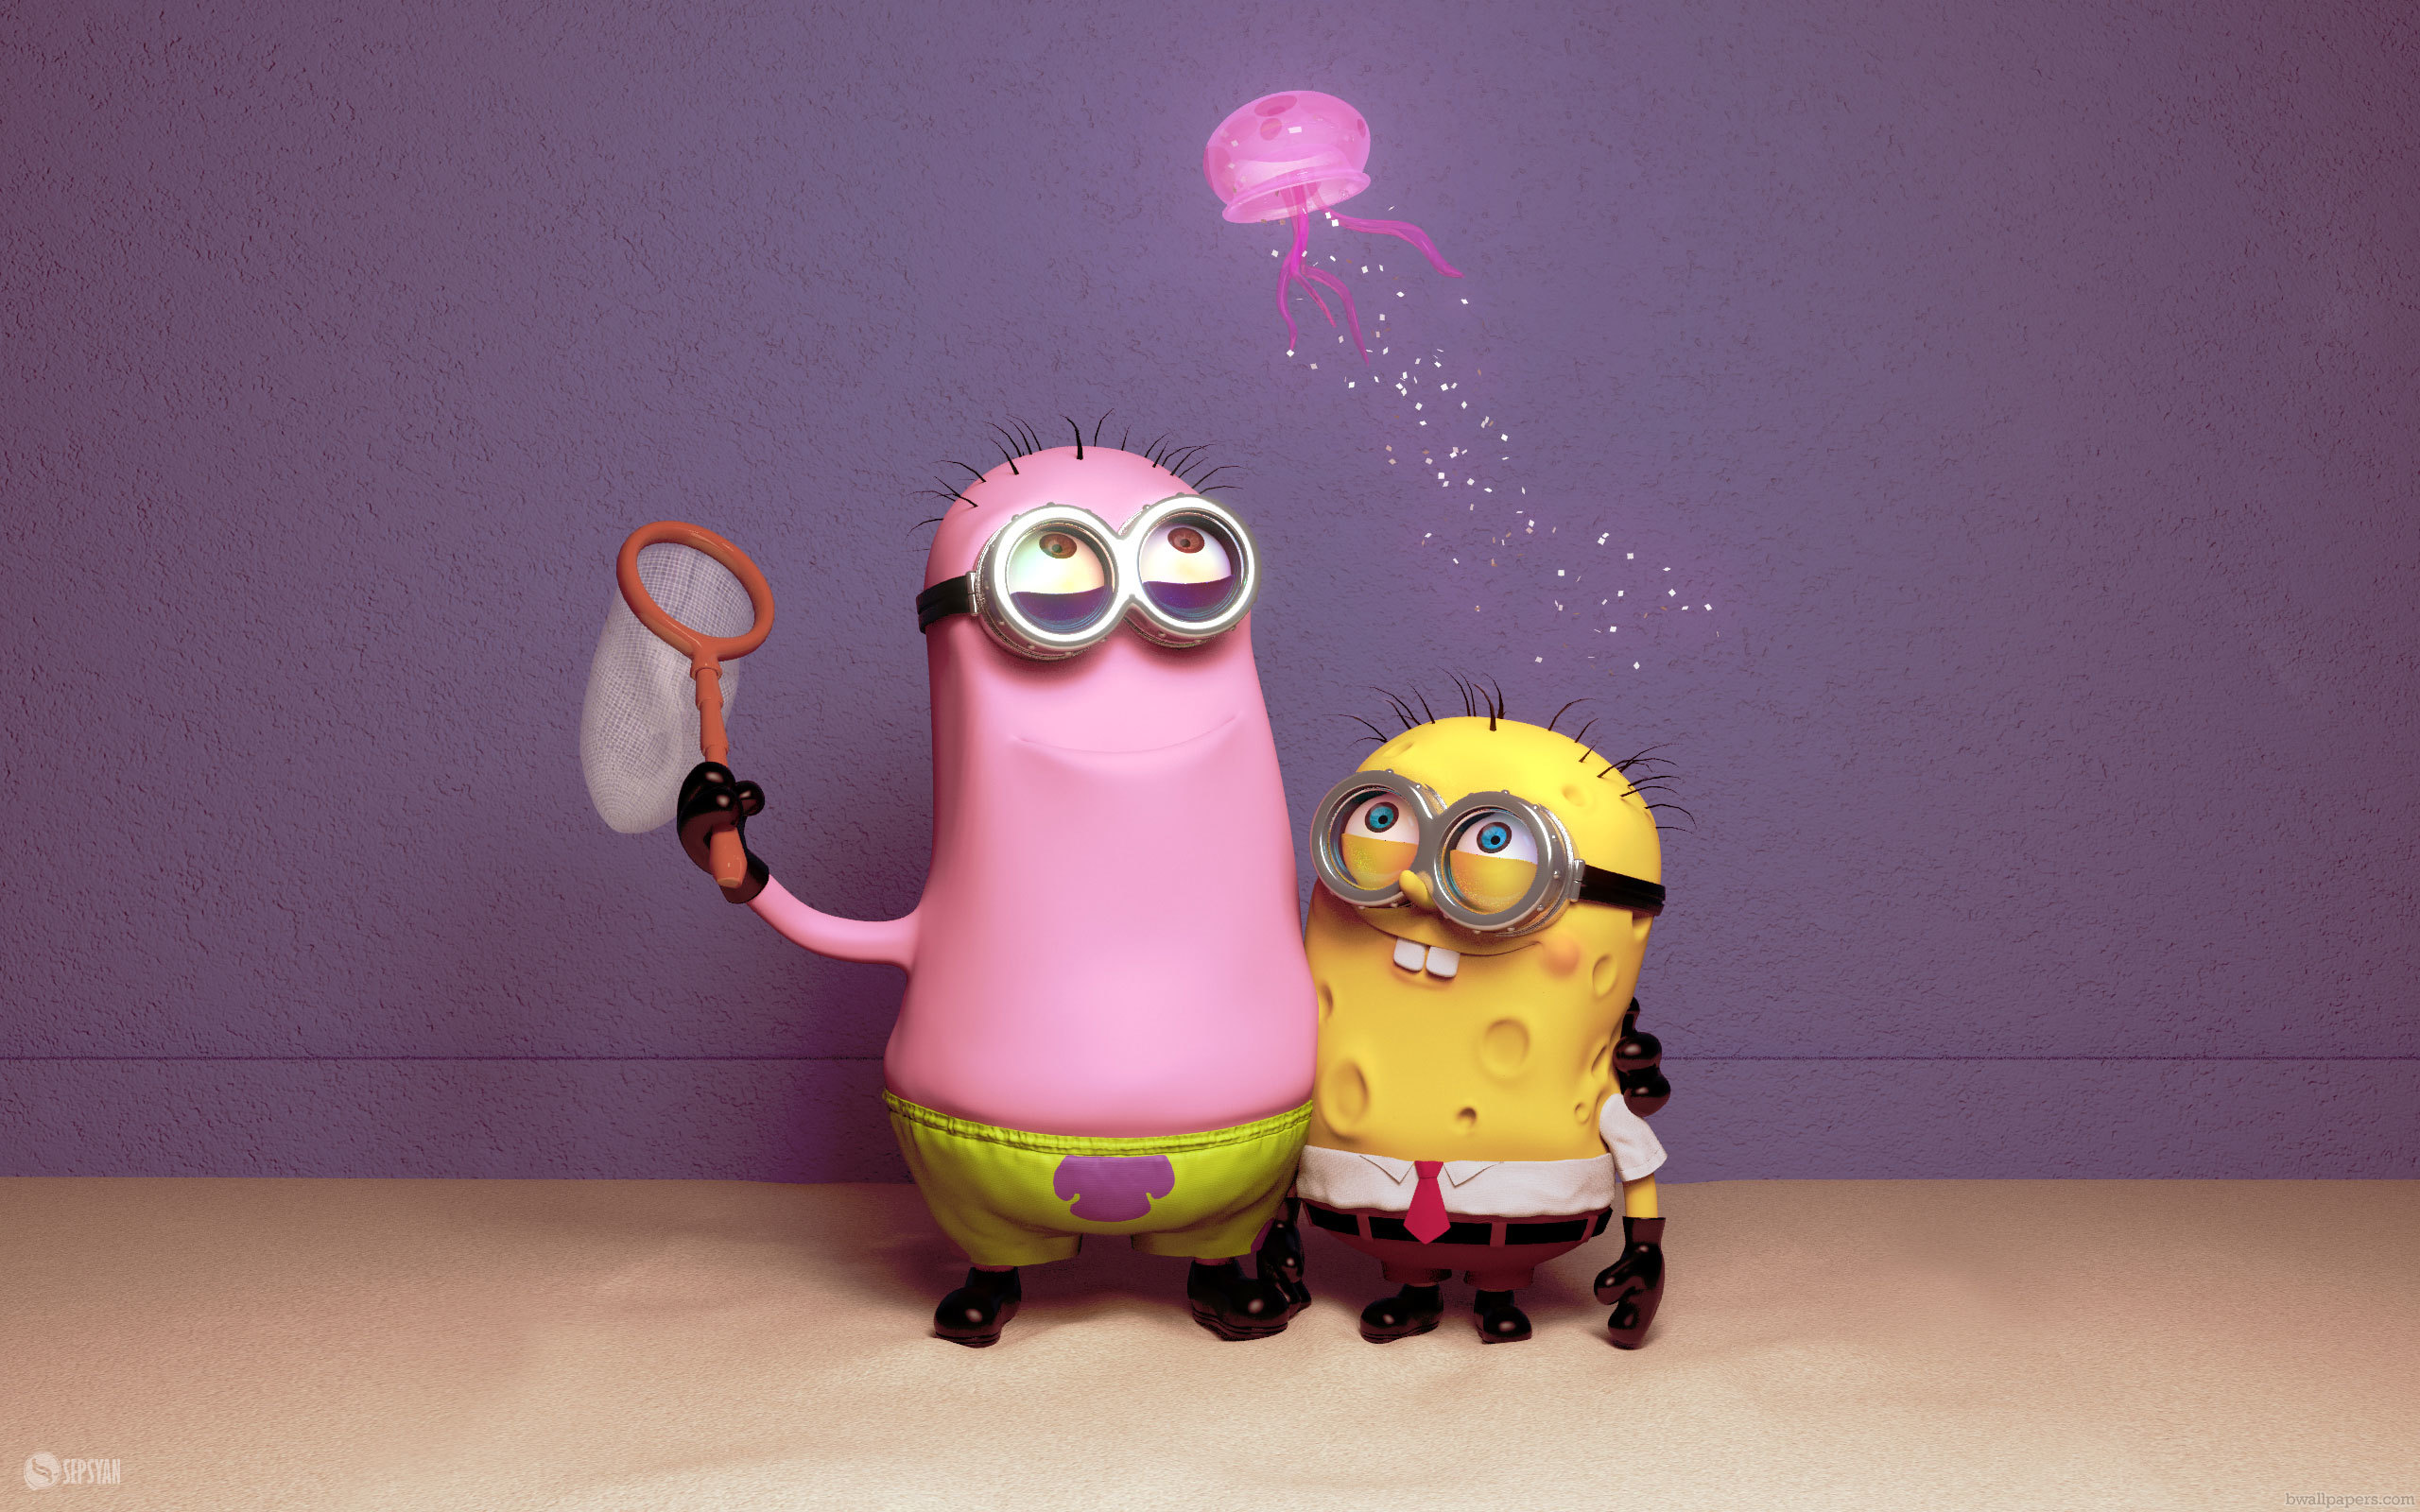 Funny Minions Wallpaper High Definition Quality Widescreen